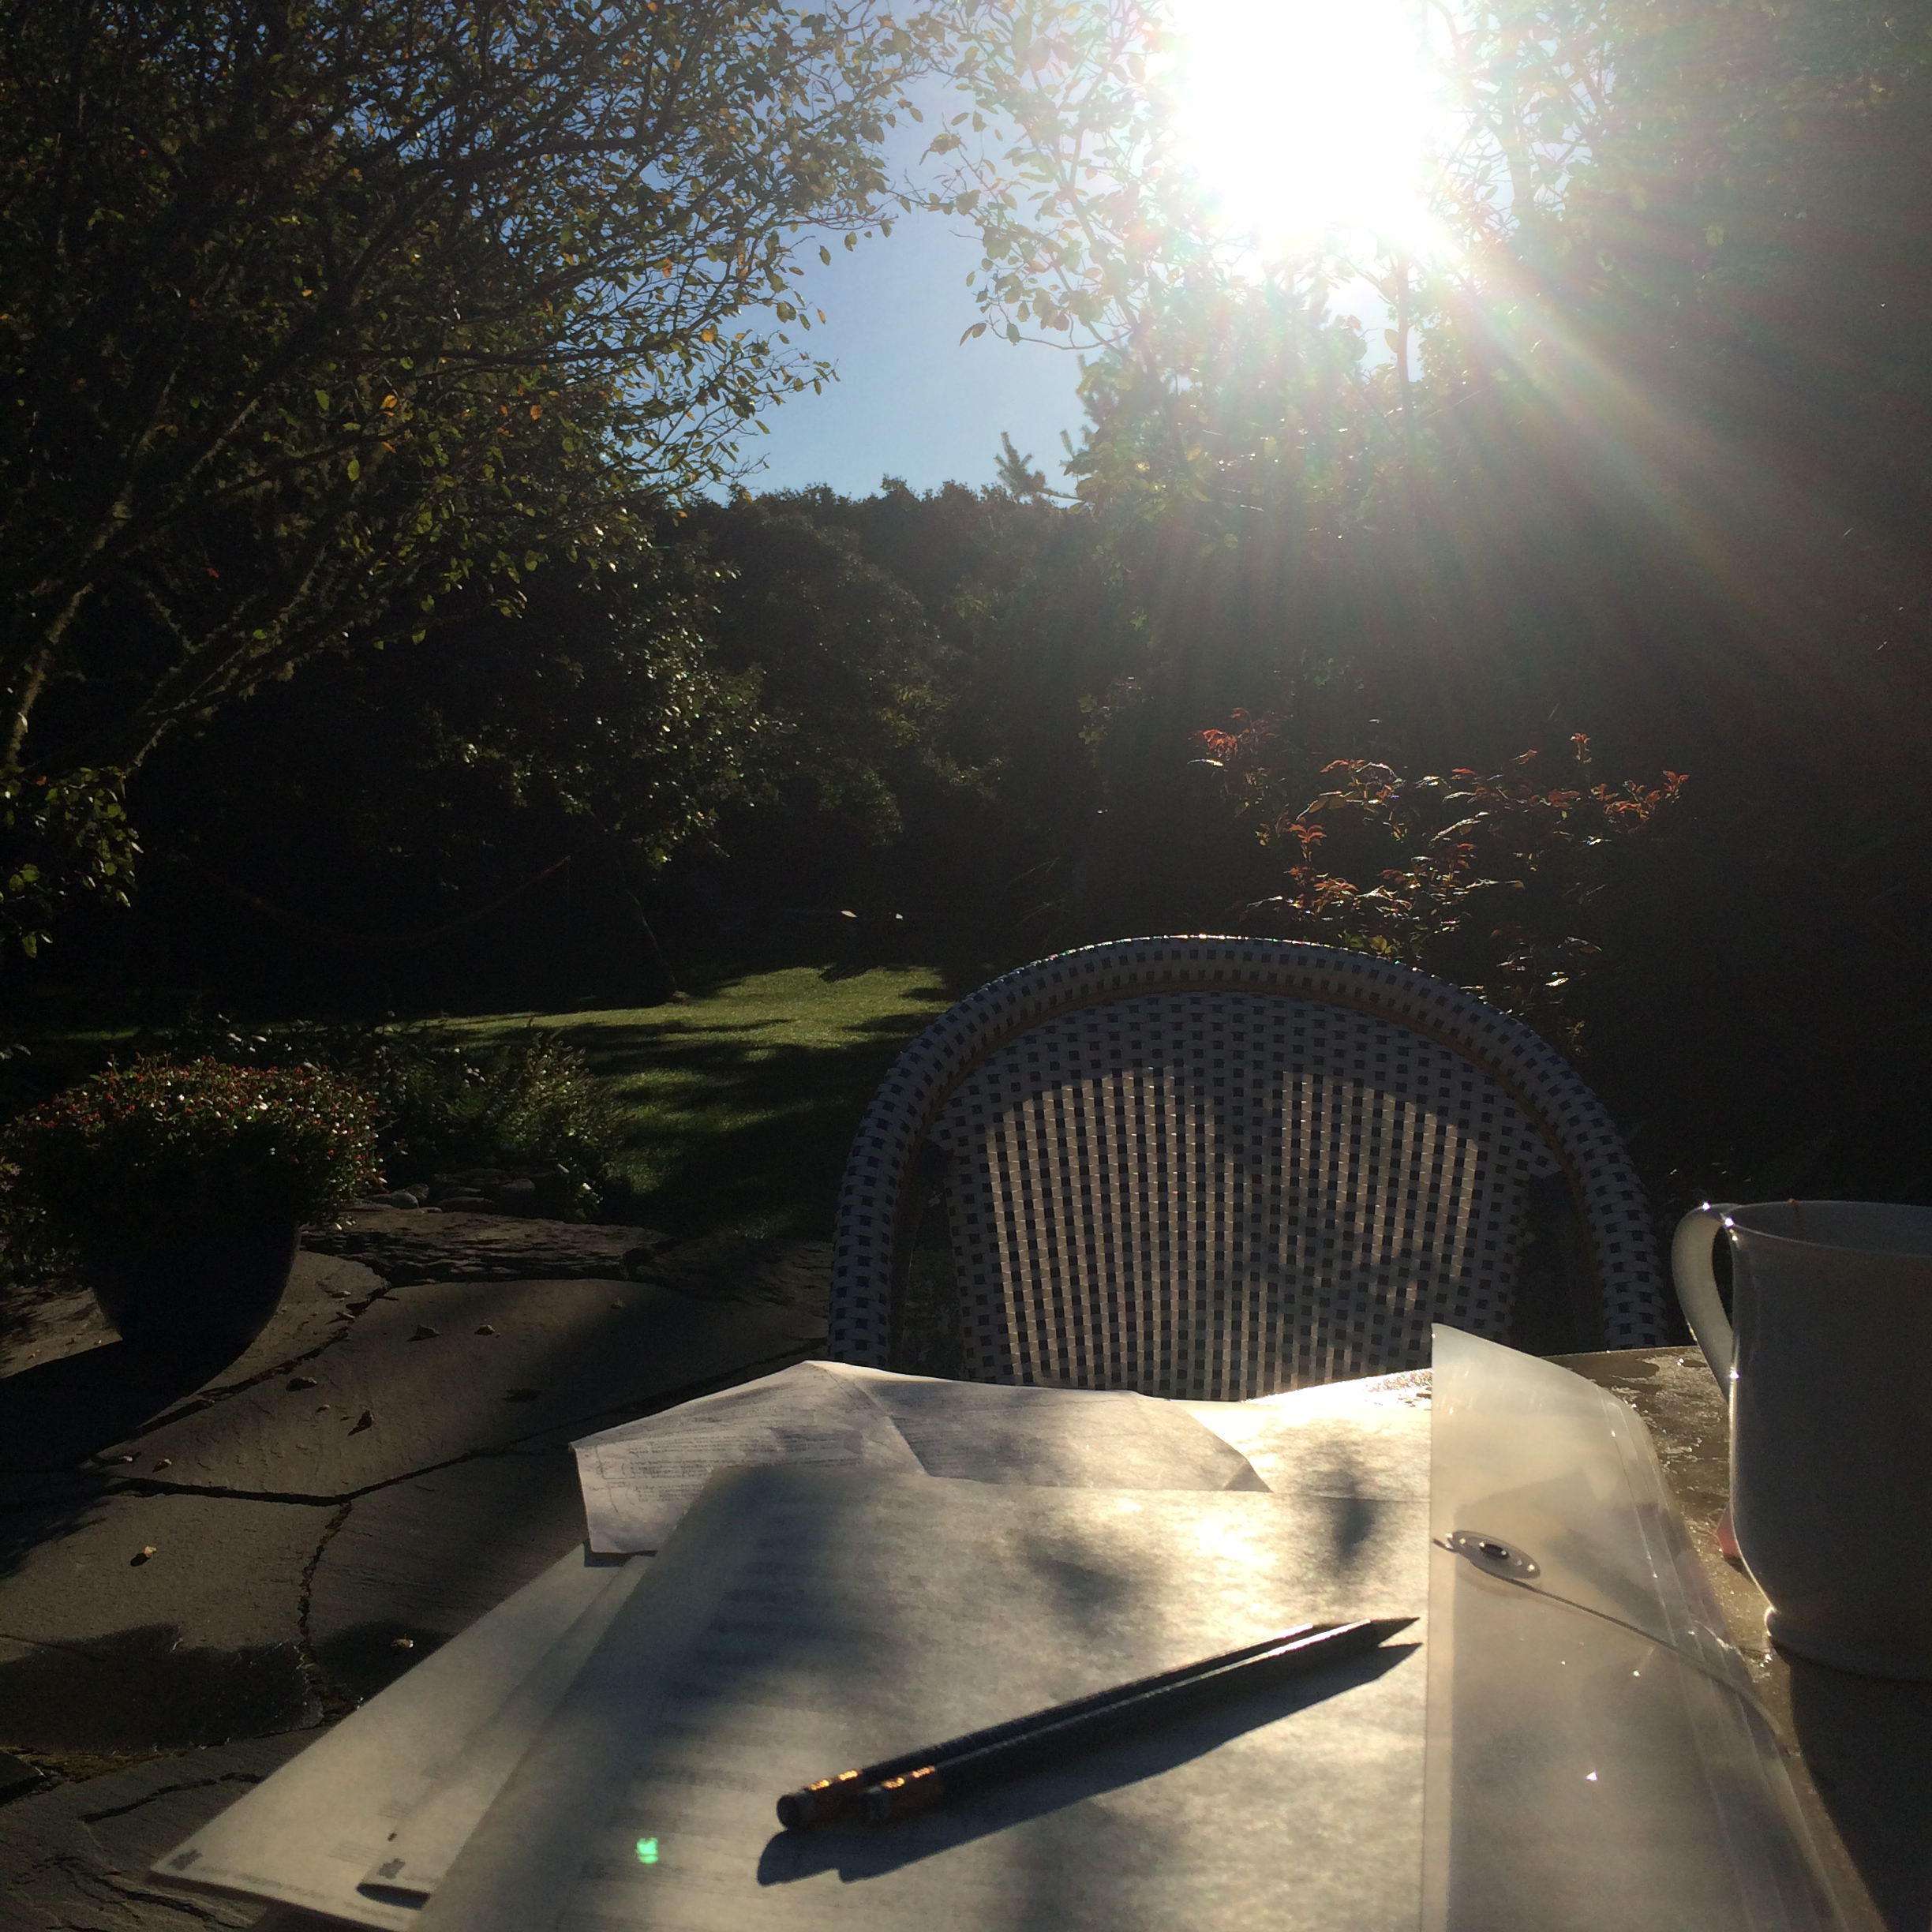 A pen sits atop a blank page of music notation paper on a table outside, the sun setting in the background.